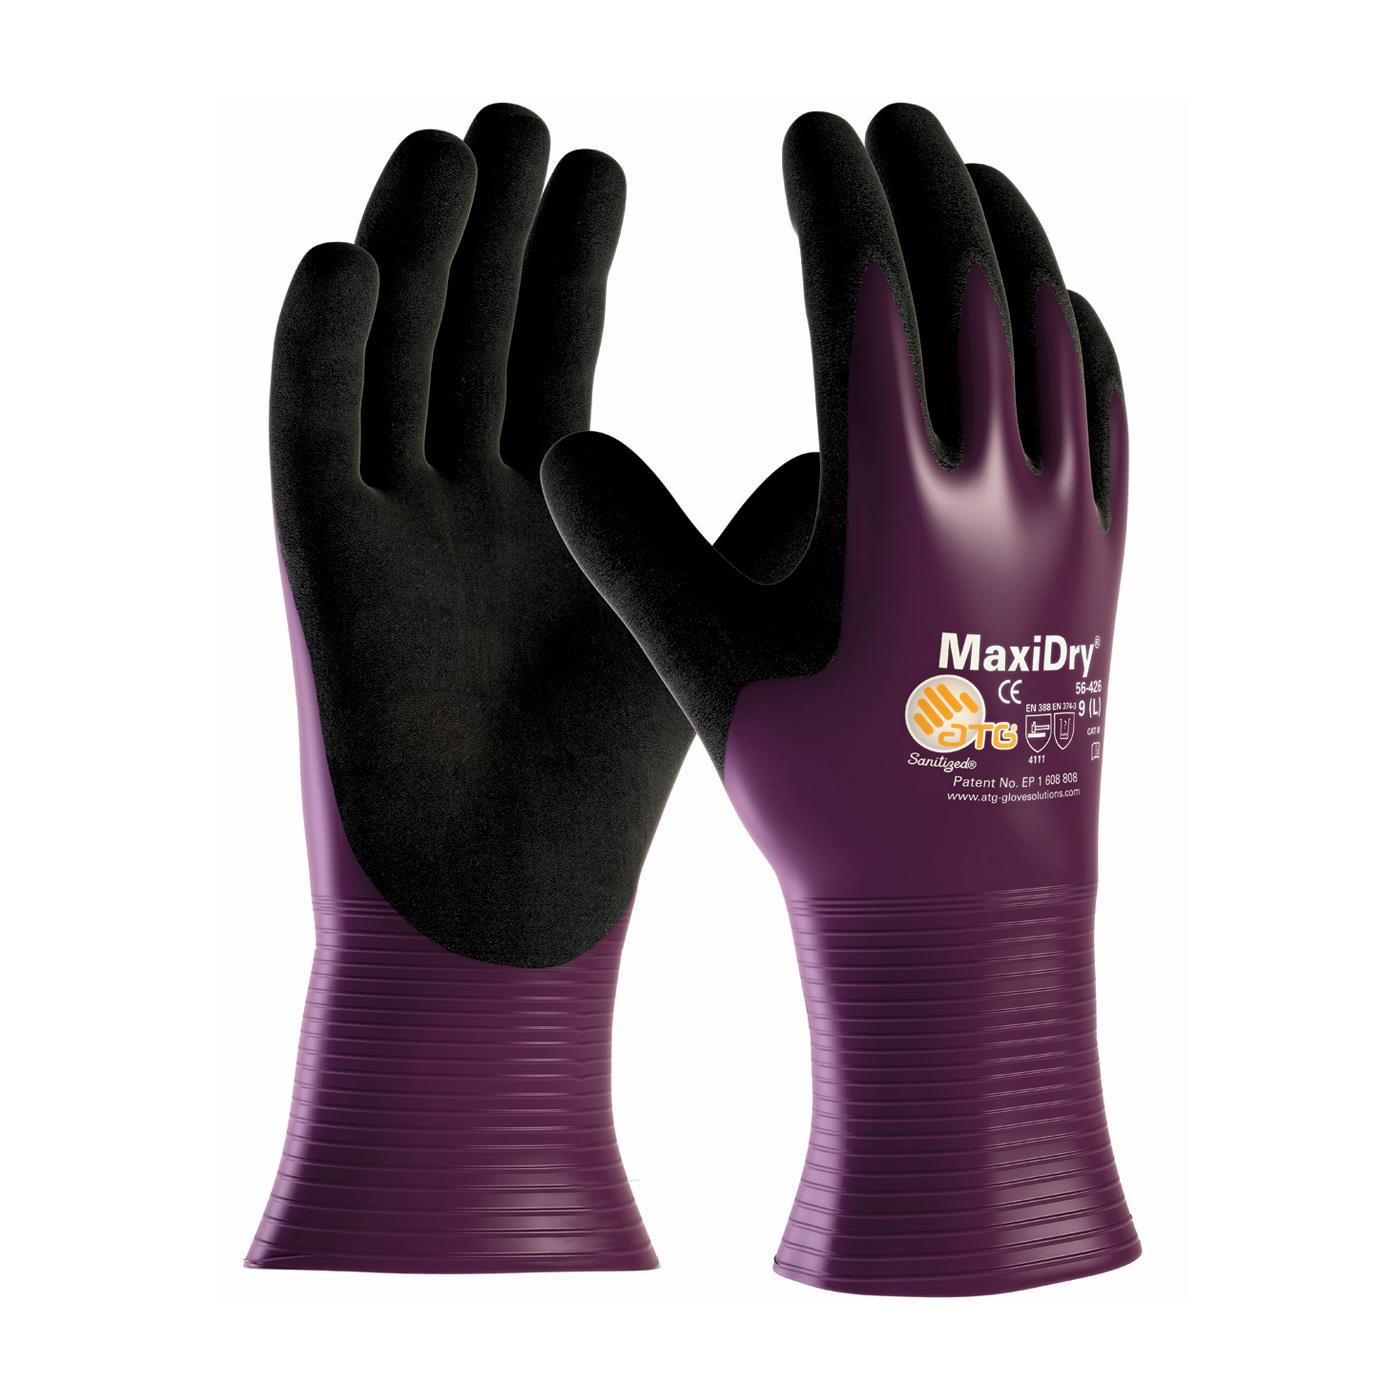 ATG MAXIDRY FULLY DIPPED NITRILE - Chemical Resistant Gloves